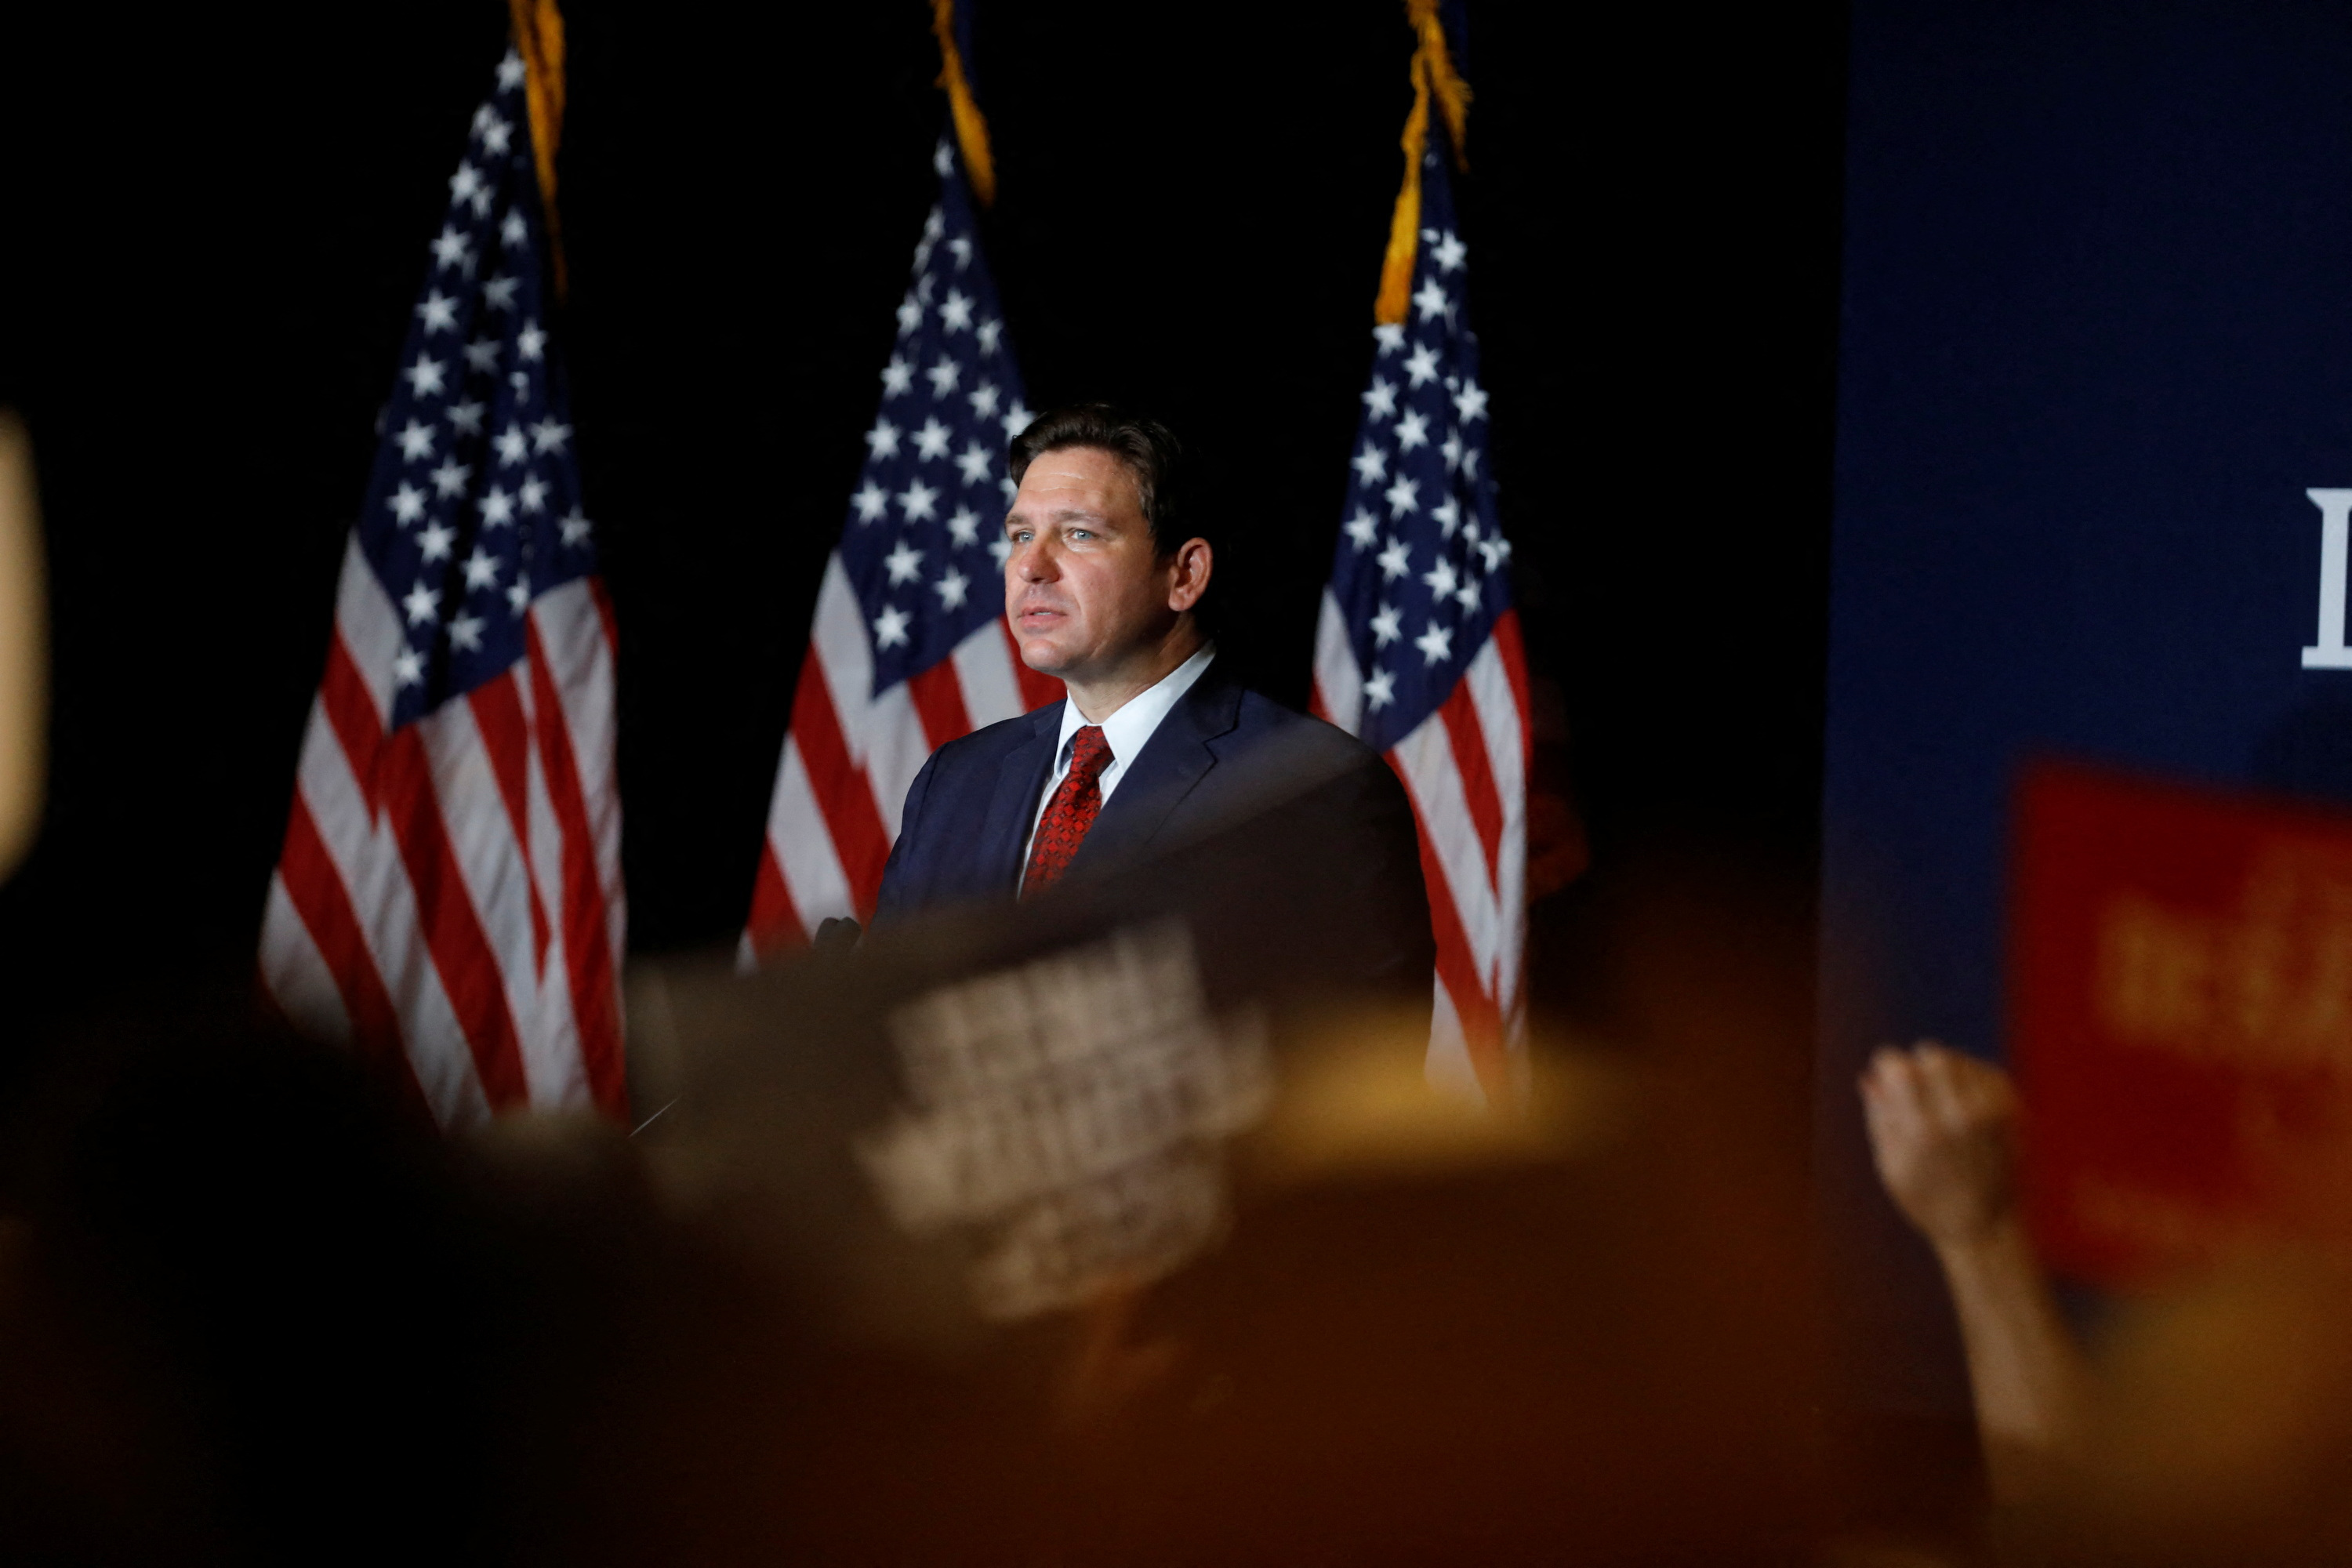 DeSantis hosts a rally in Tampa after primary